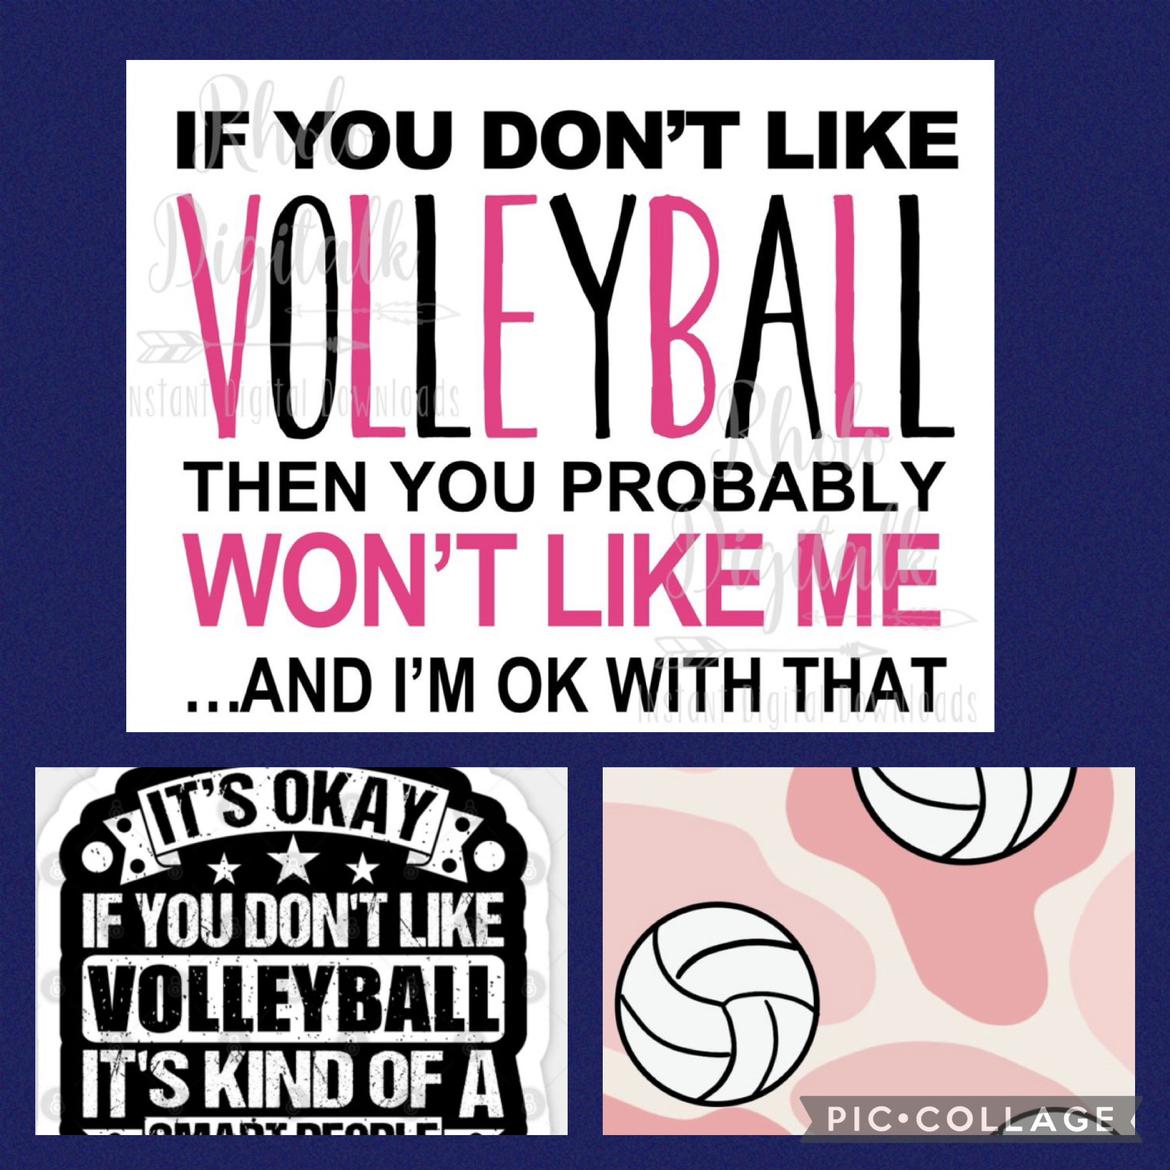 Volleyballgirl7's images